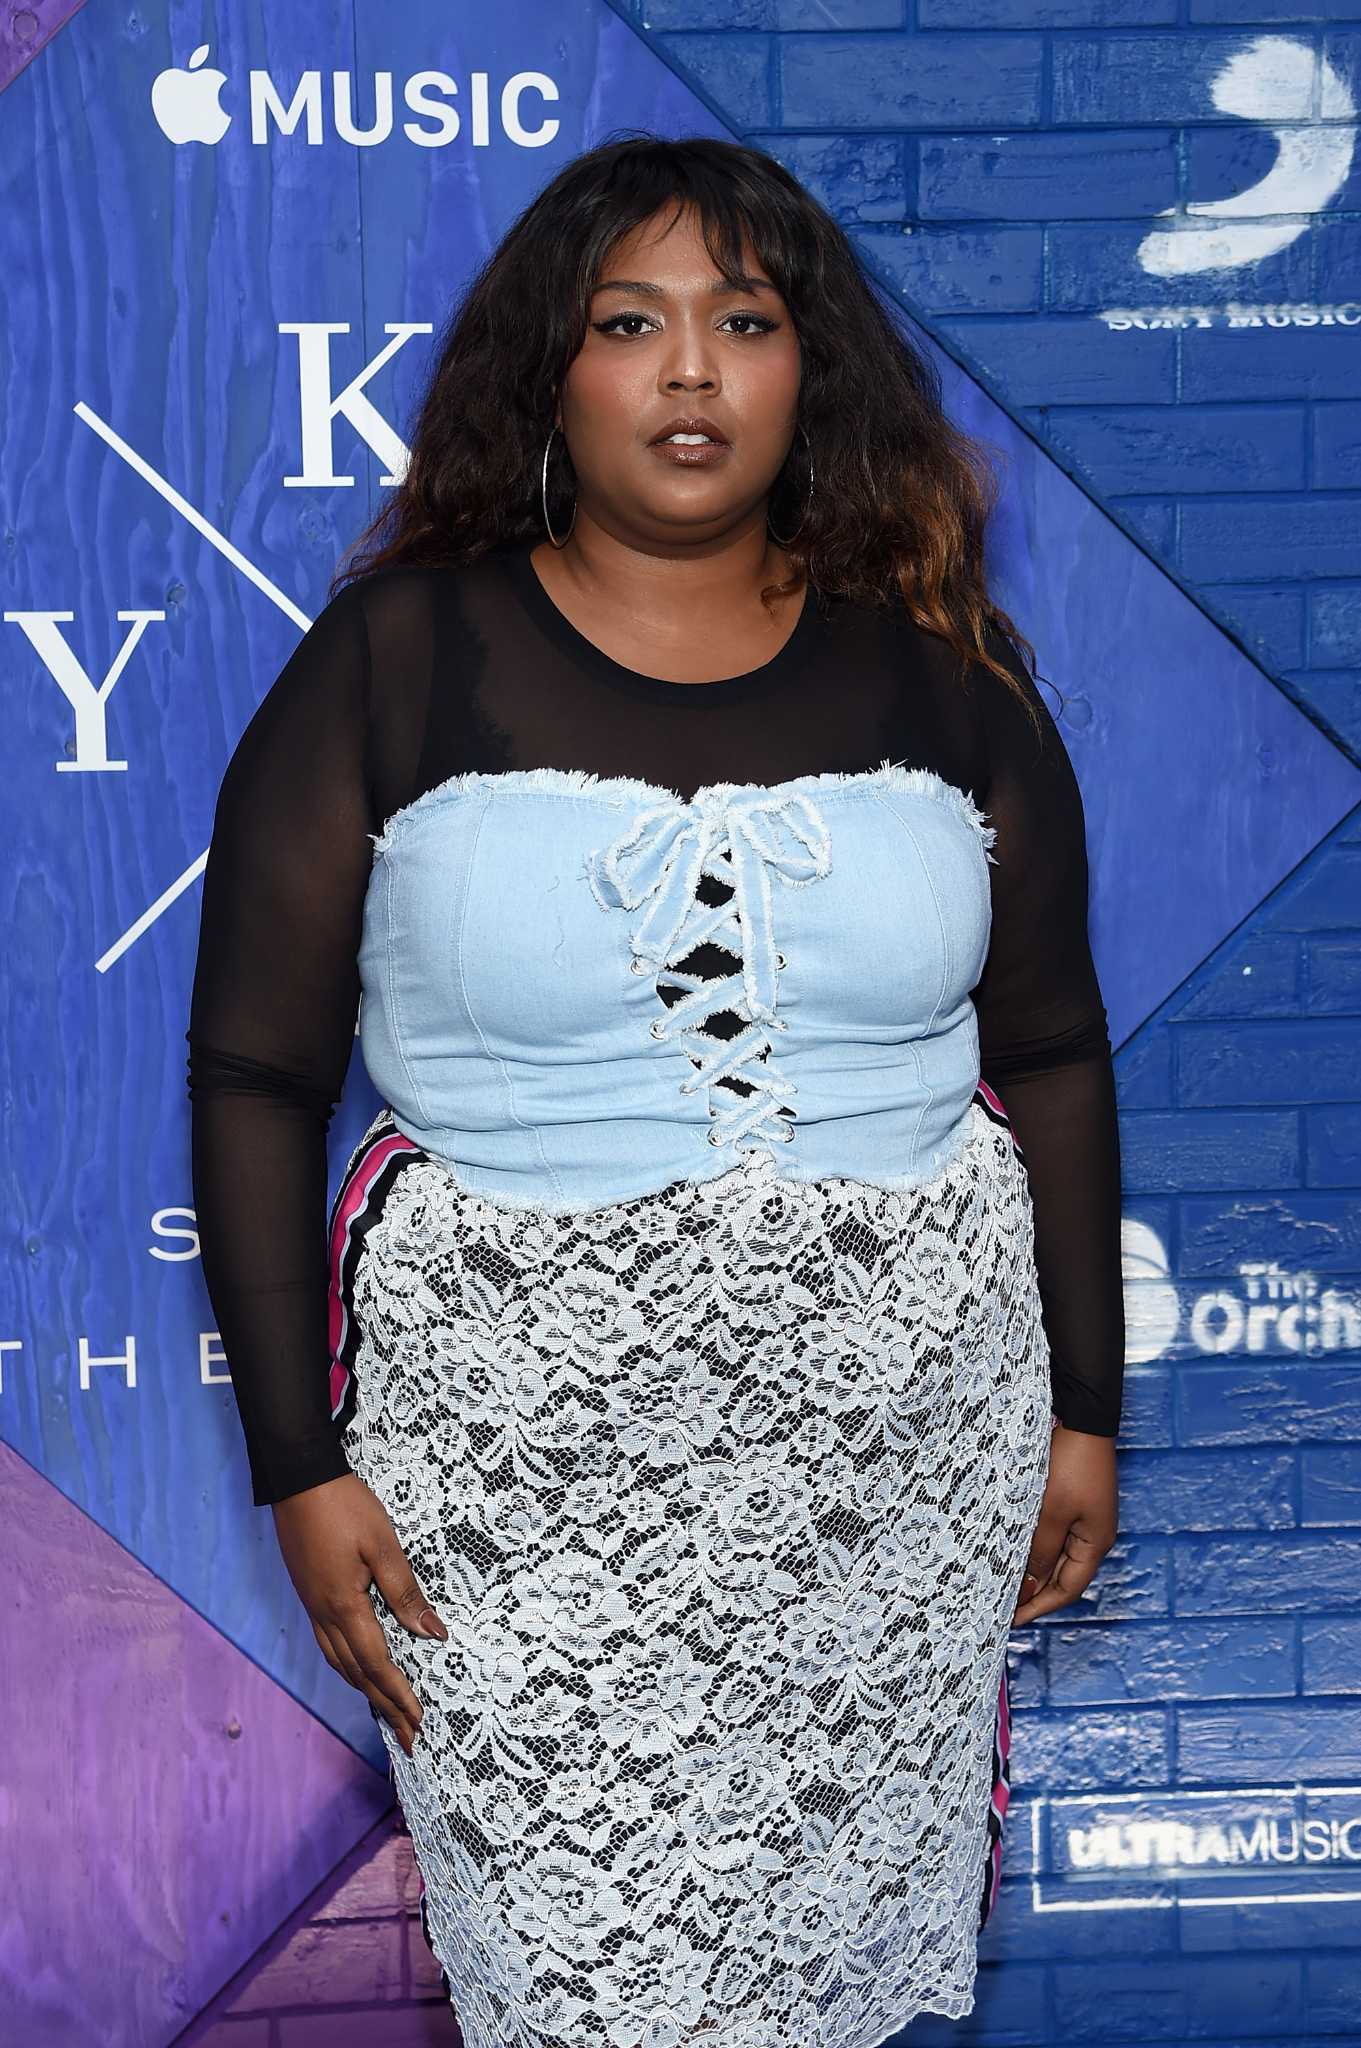 Singer Lizzo attends the '2017 Billboard Music Awards' and ELLE News  Photo - Getty Images